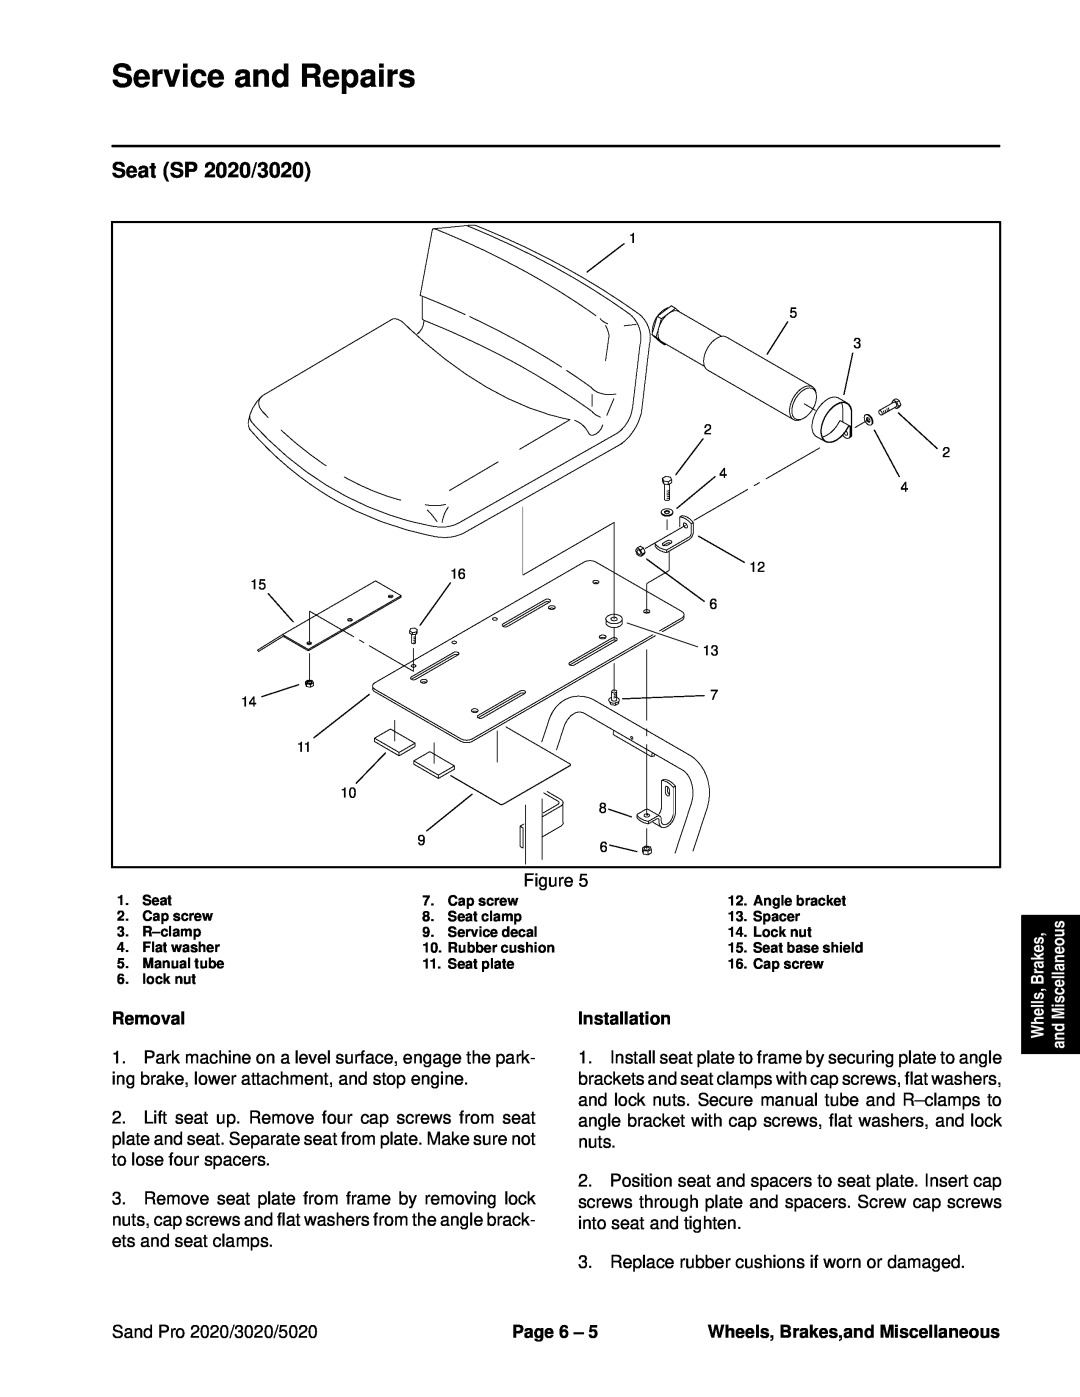 Toro service manual Seat SP 2020/3020, Service and Repairs, Removal, Installation, Sand Pro 2020/3020/5020, Page 6 